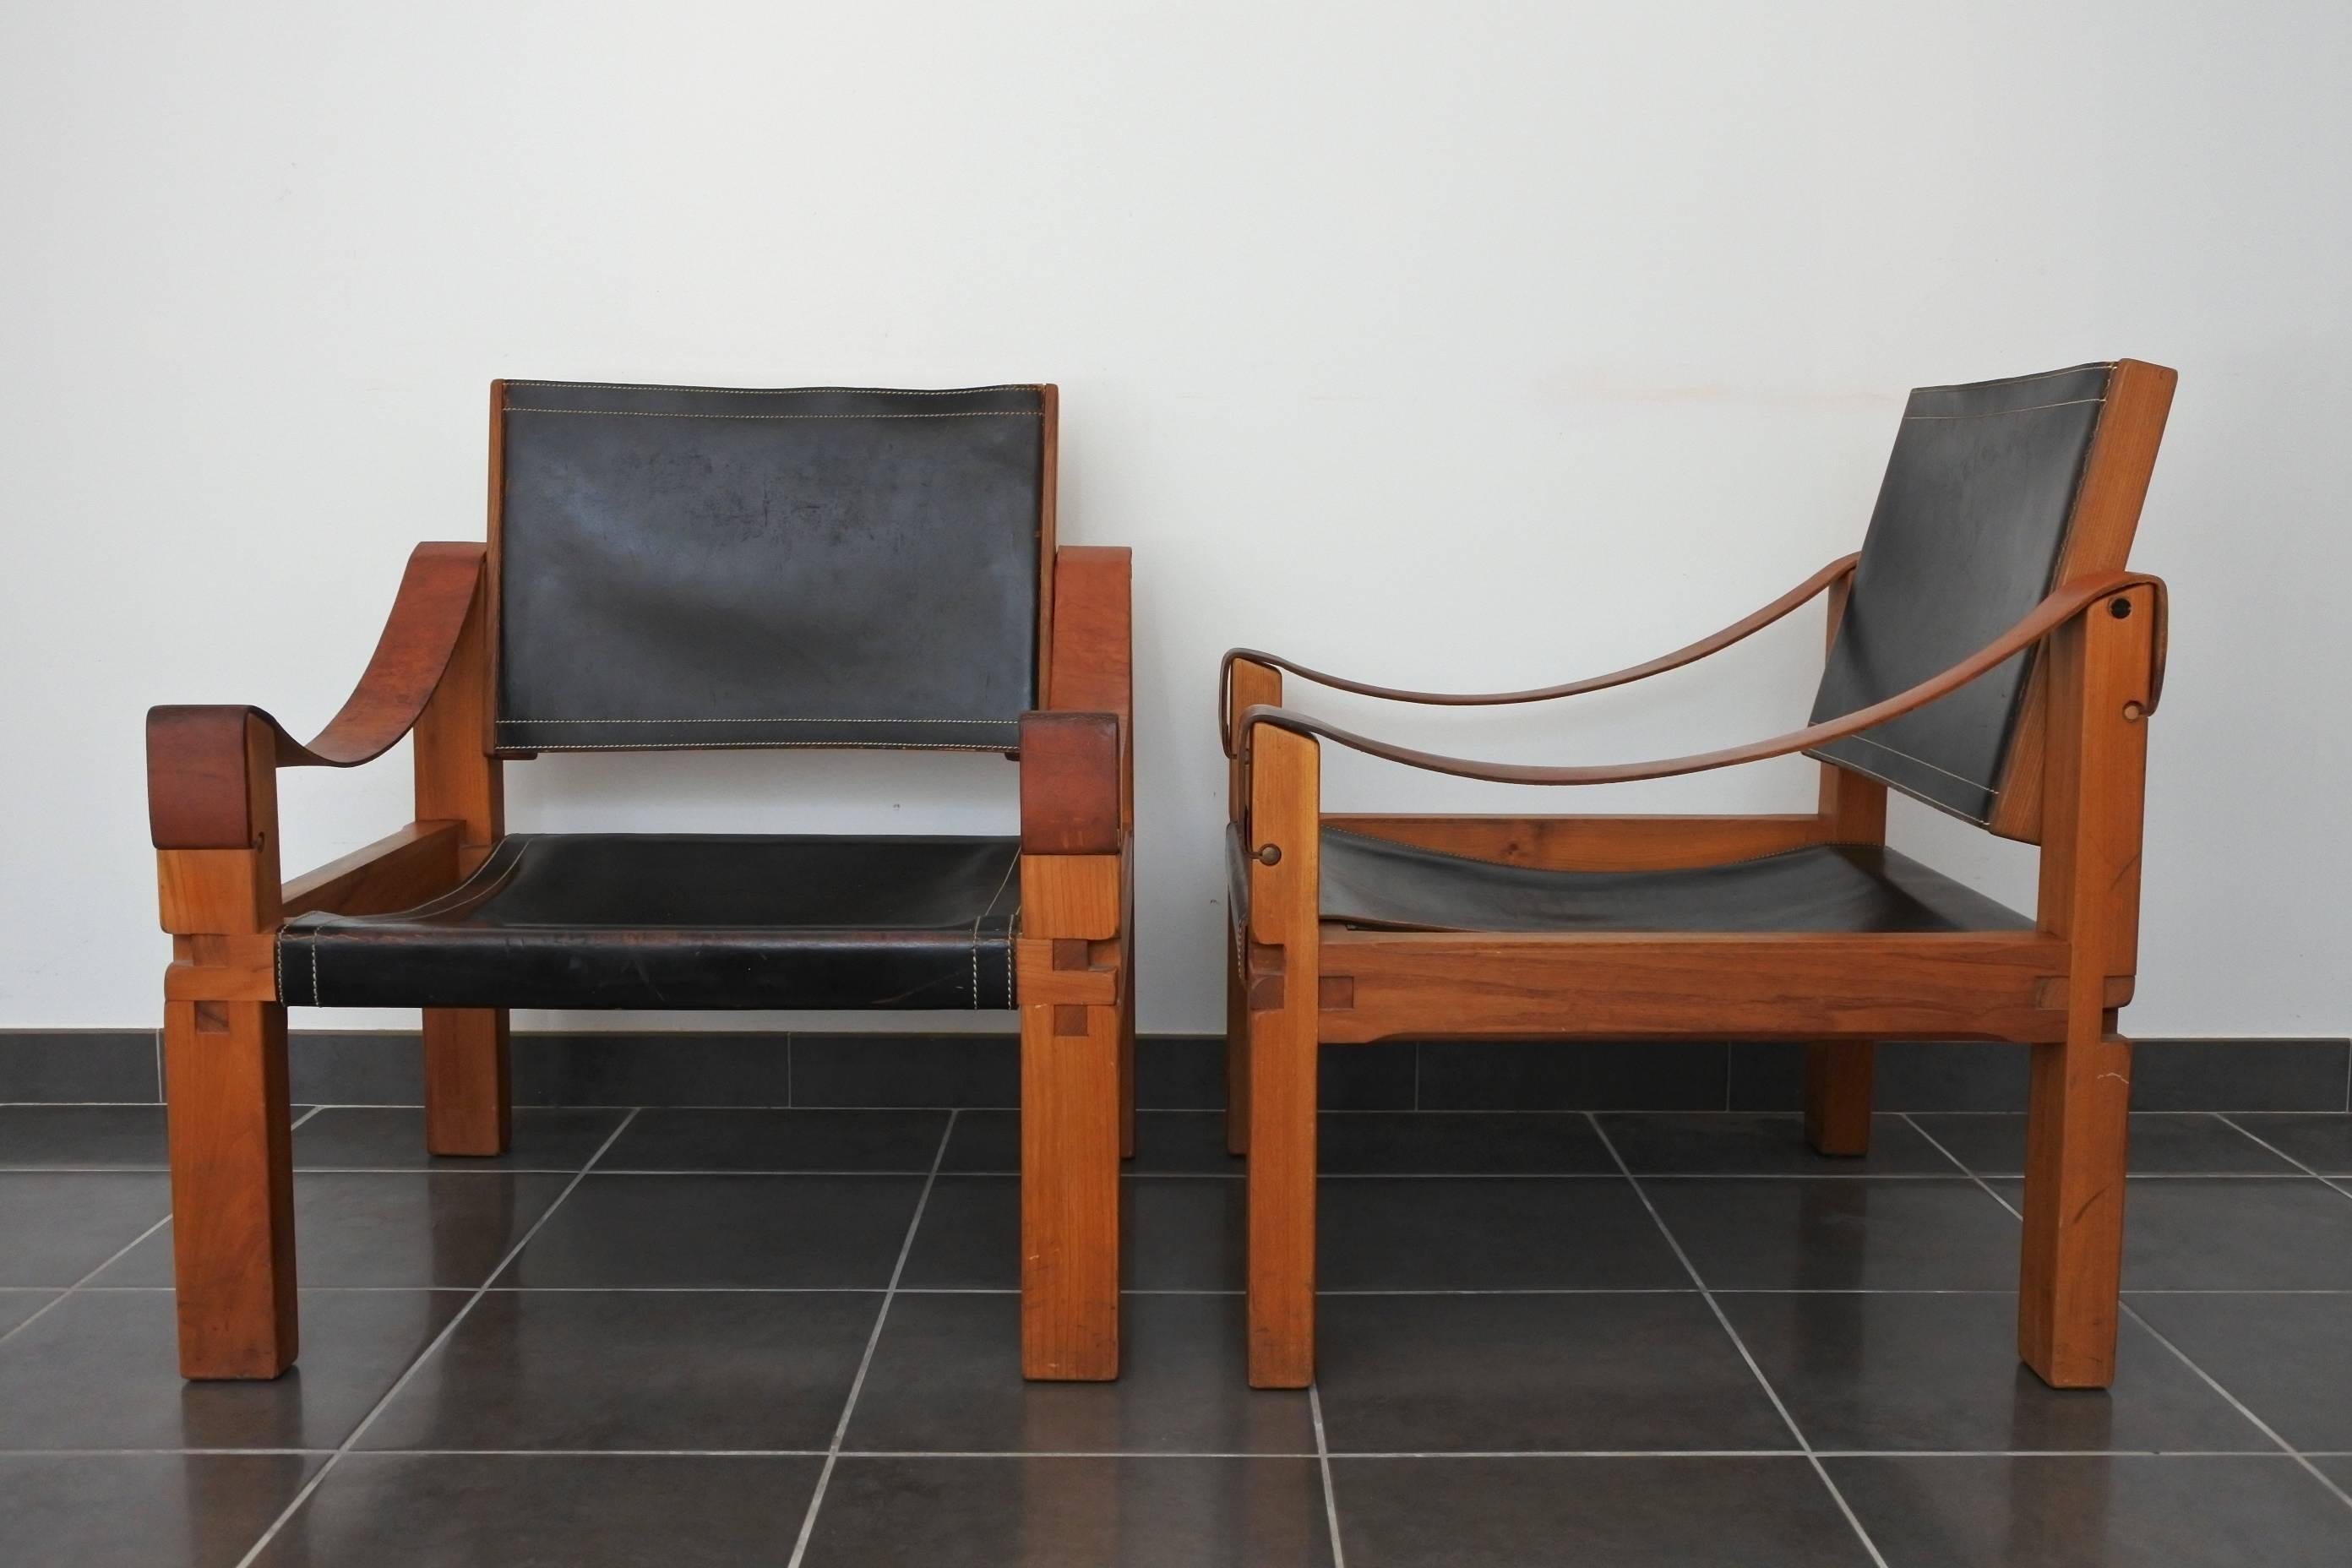 Pair of elm wood and leather armchairs by French designer Pierre Chapo.
Sling Seat and back rest in black leather and sling armrests in dark brown leather.
The two-tone leather is fully original, ordered as is to Chapo's workshop by the previous